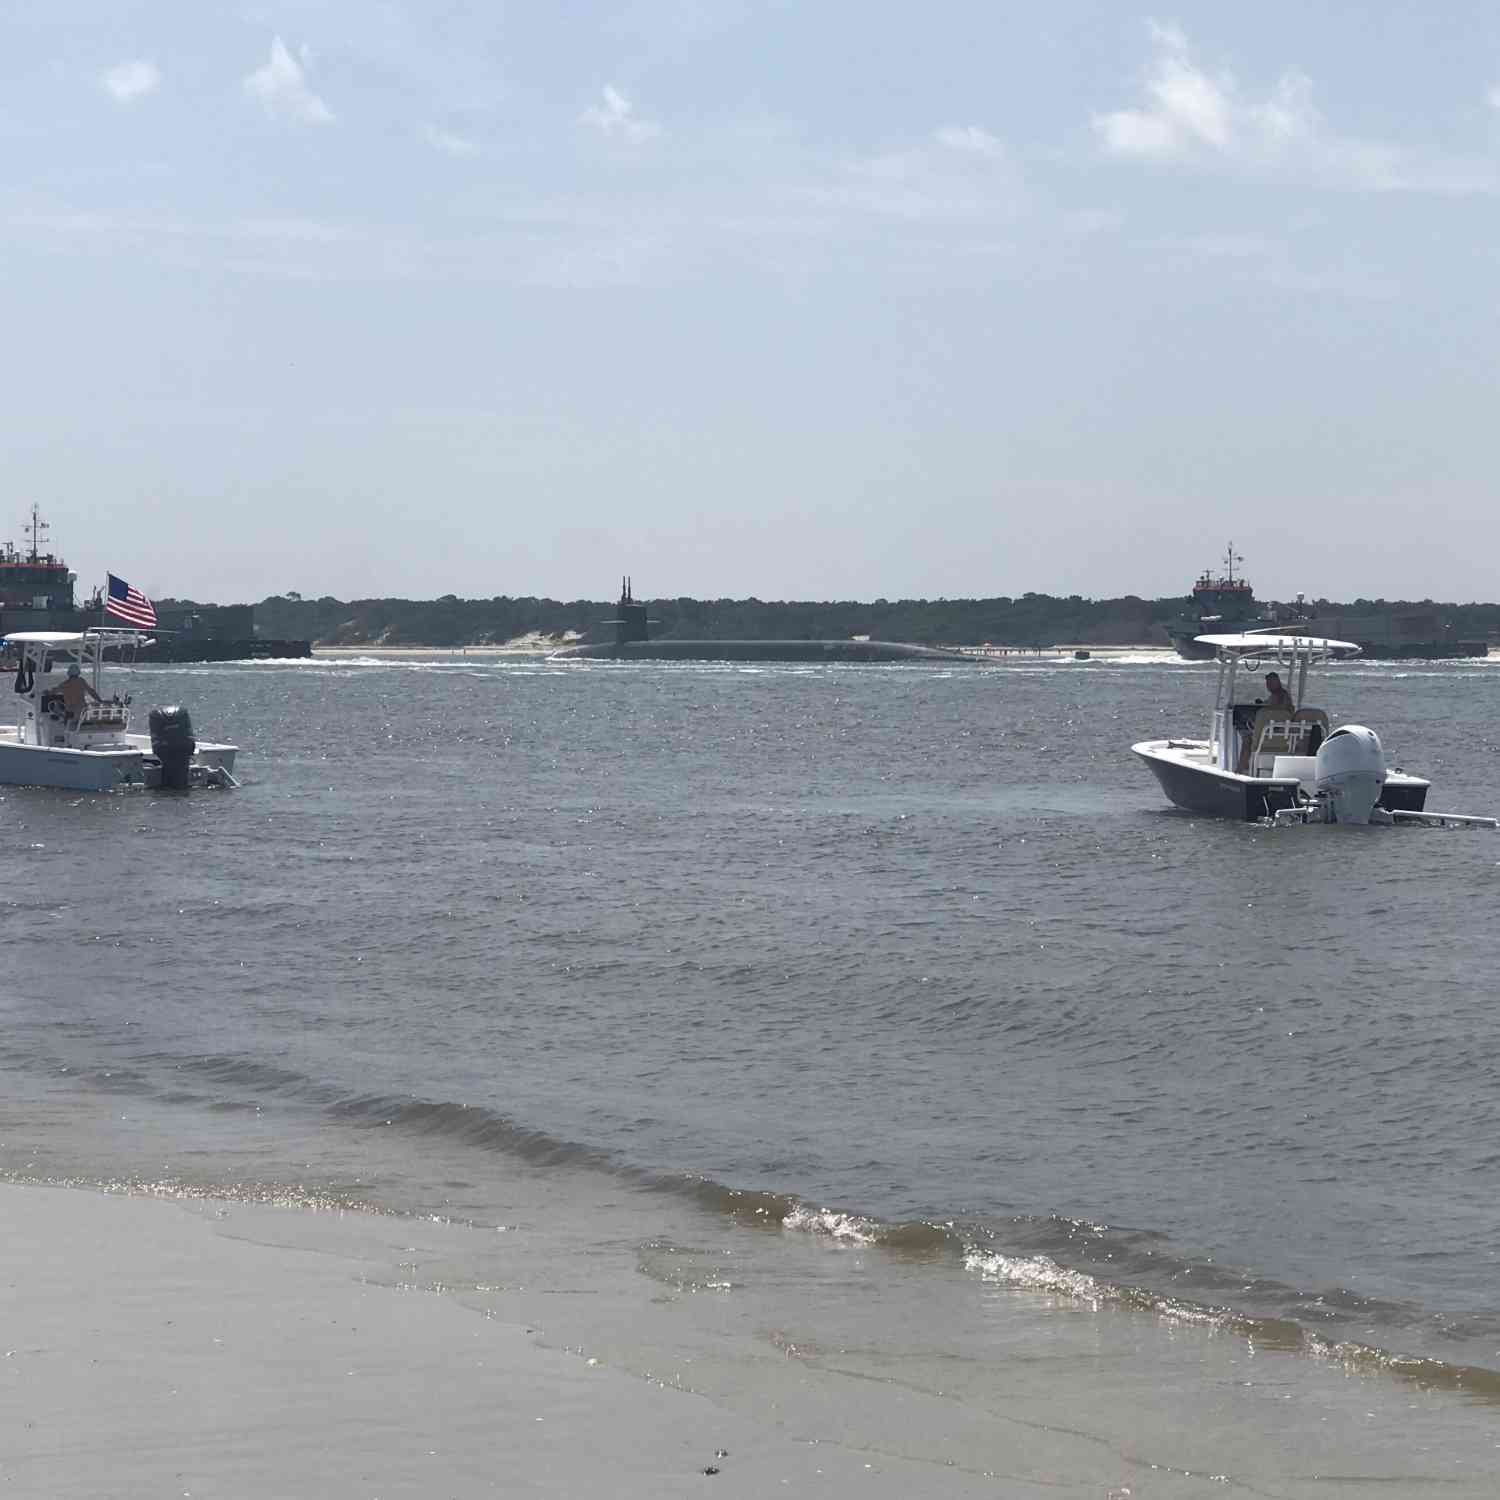 Two boats. One American flag and a US Navy Submarine headed out to sea